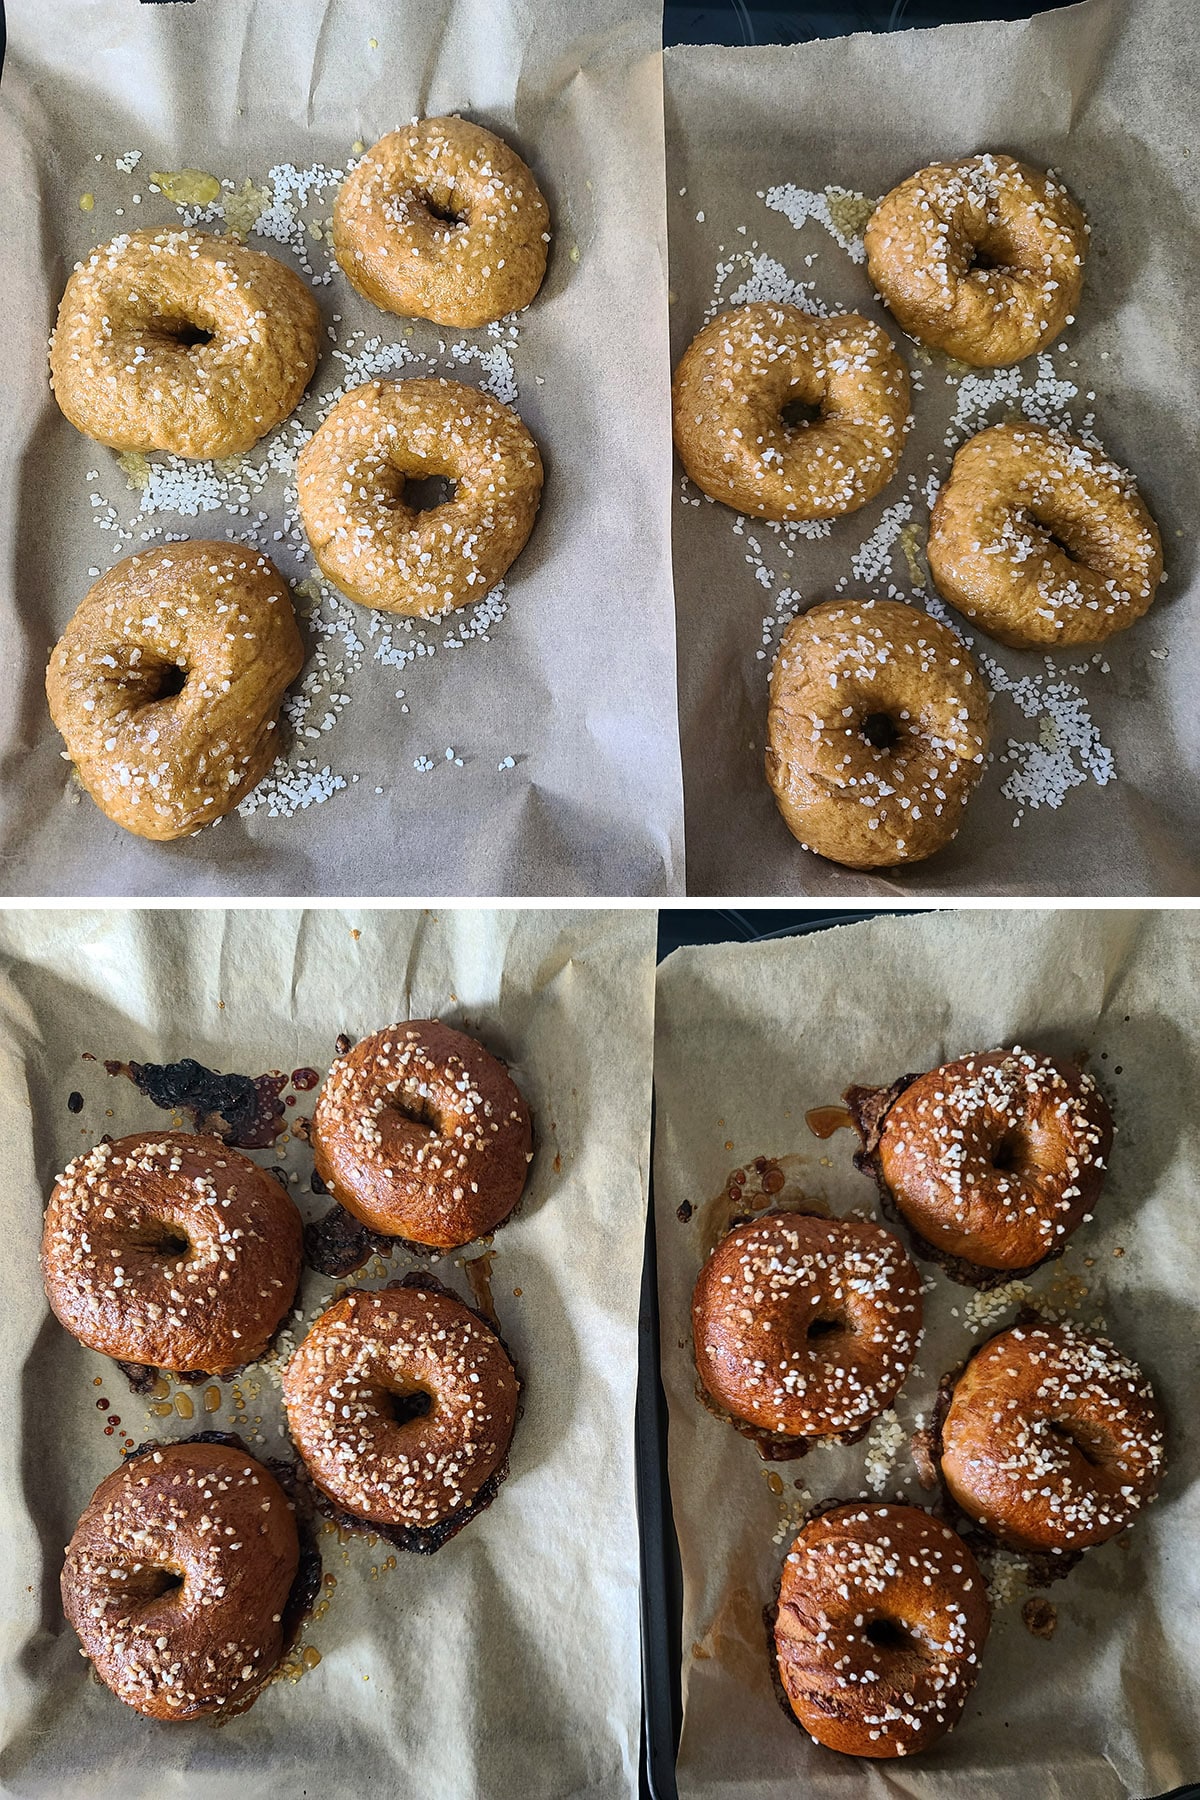 A 2 part image showing 2 trays of gingerbread bagels, before and after baking.